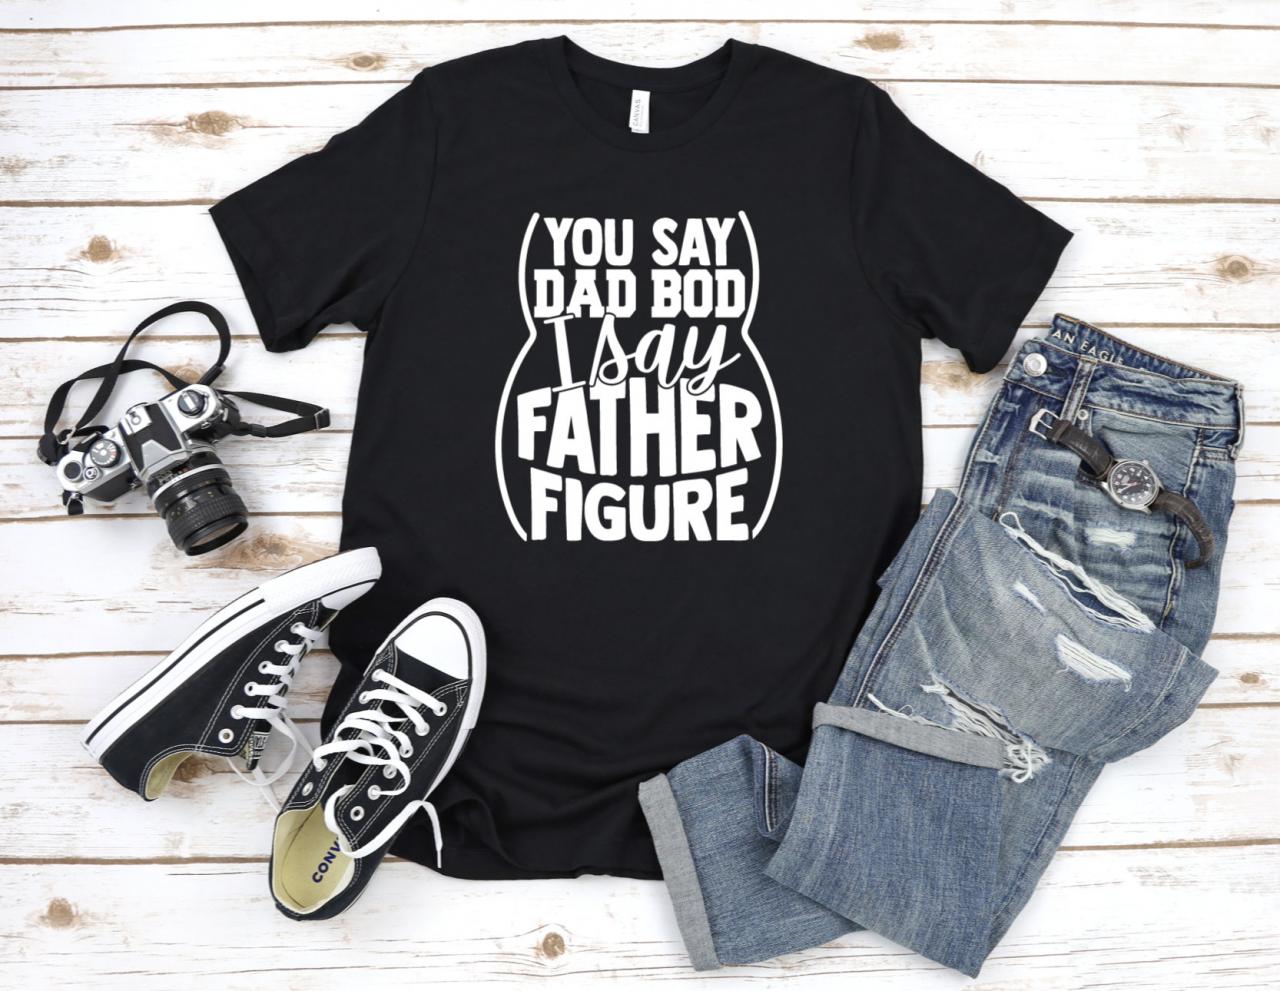 You Say Dad Bod I Say Father Figure Shirt, Father's Day Shirt, Father's Day Gift, Dad Bod Shirt, Gift for Dad, Gift for Him